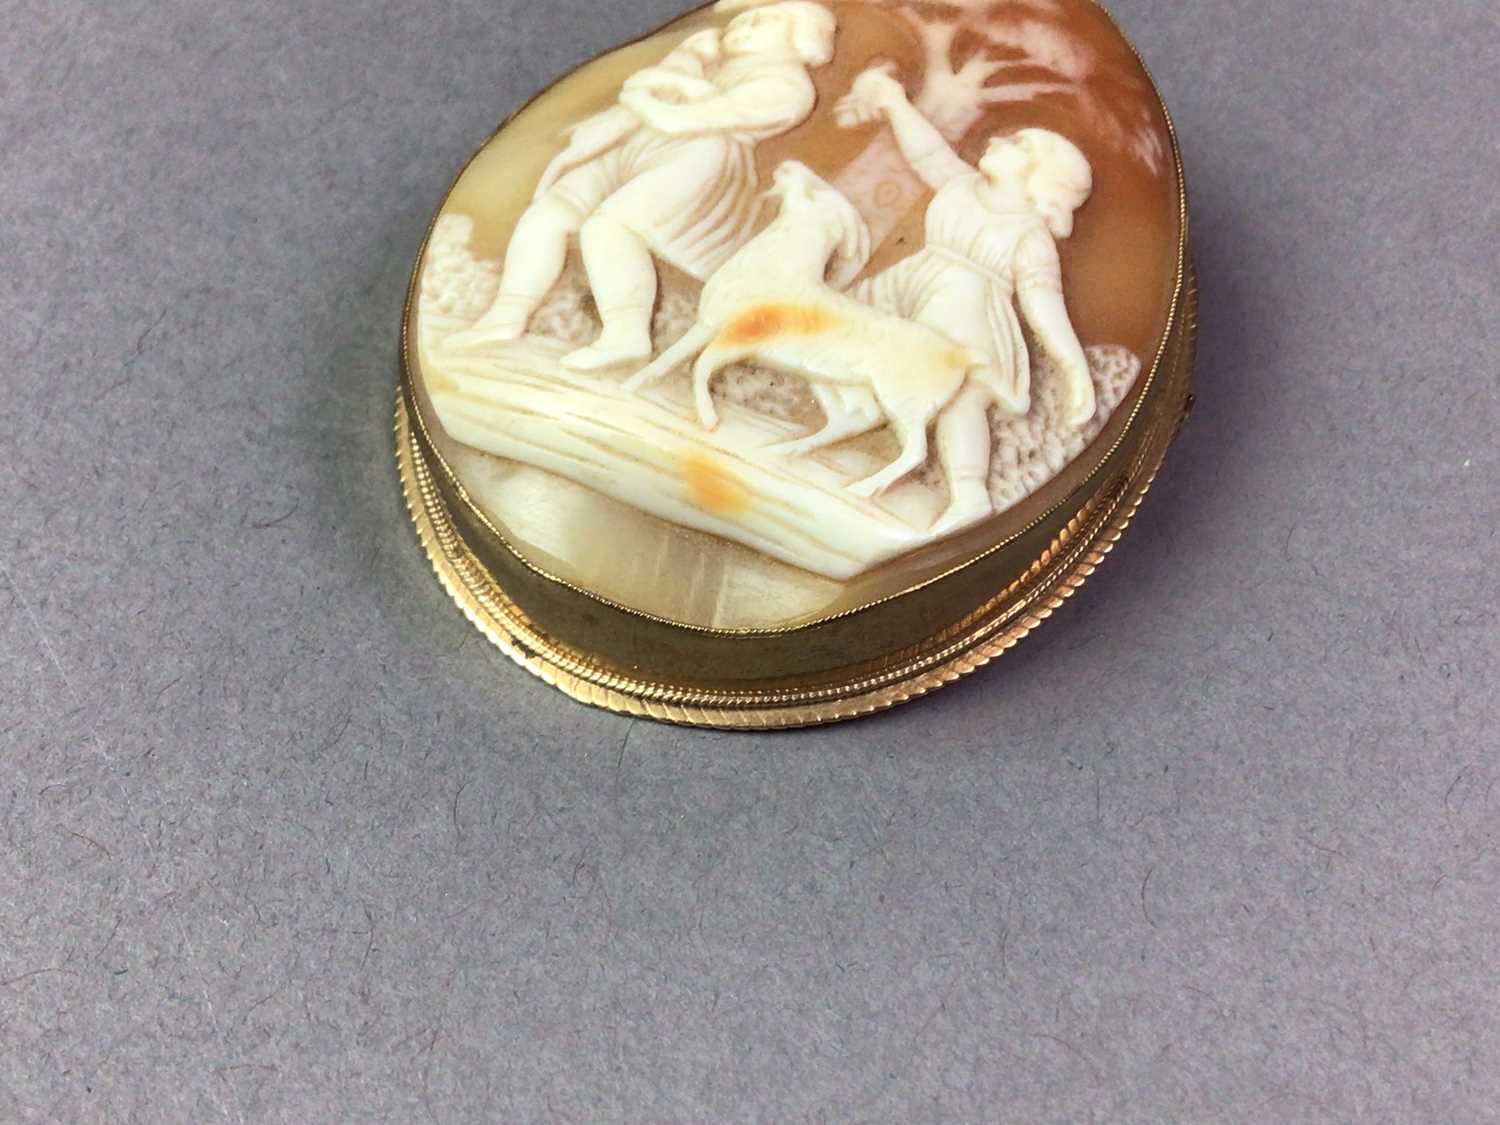 TWO CARVED CAMEO BROOCHES ALONG WITH A SILVER HARDSTONE BROOCH - Image 4 of 12